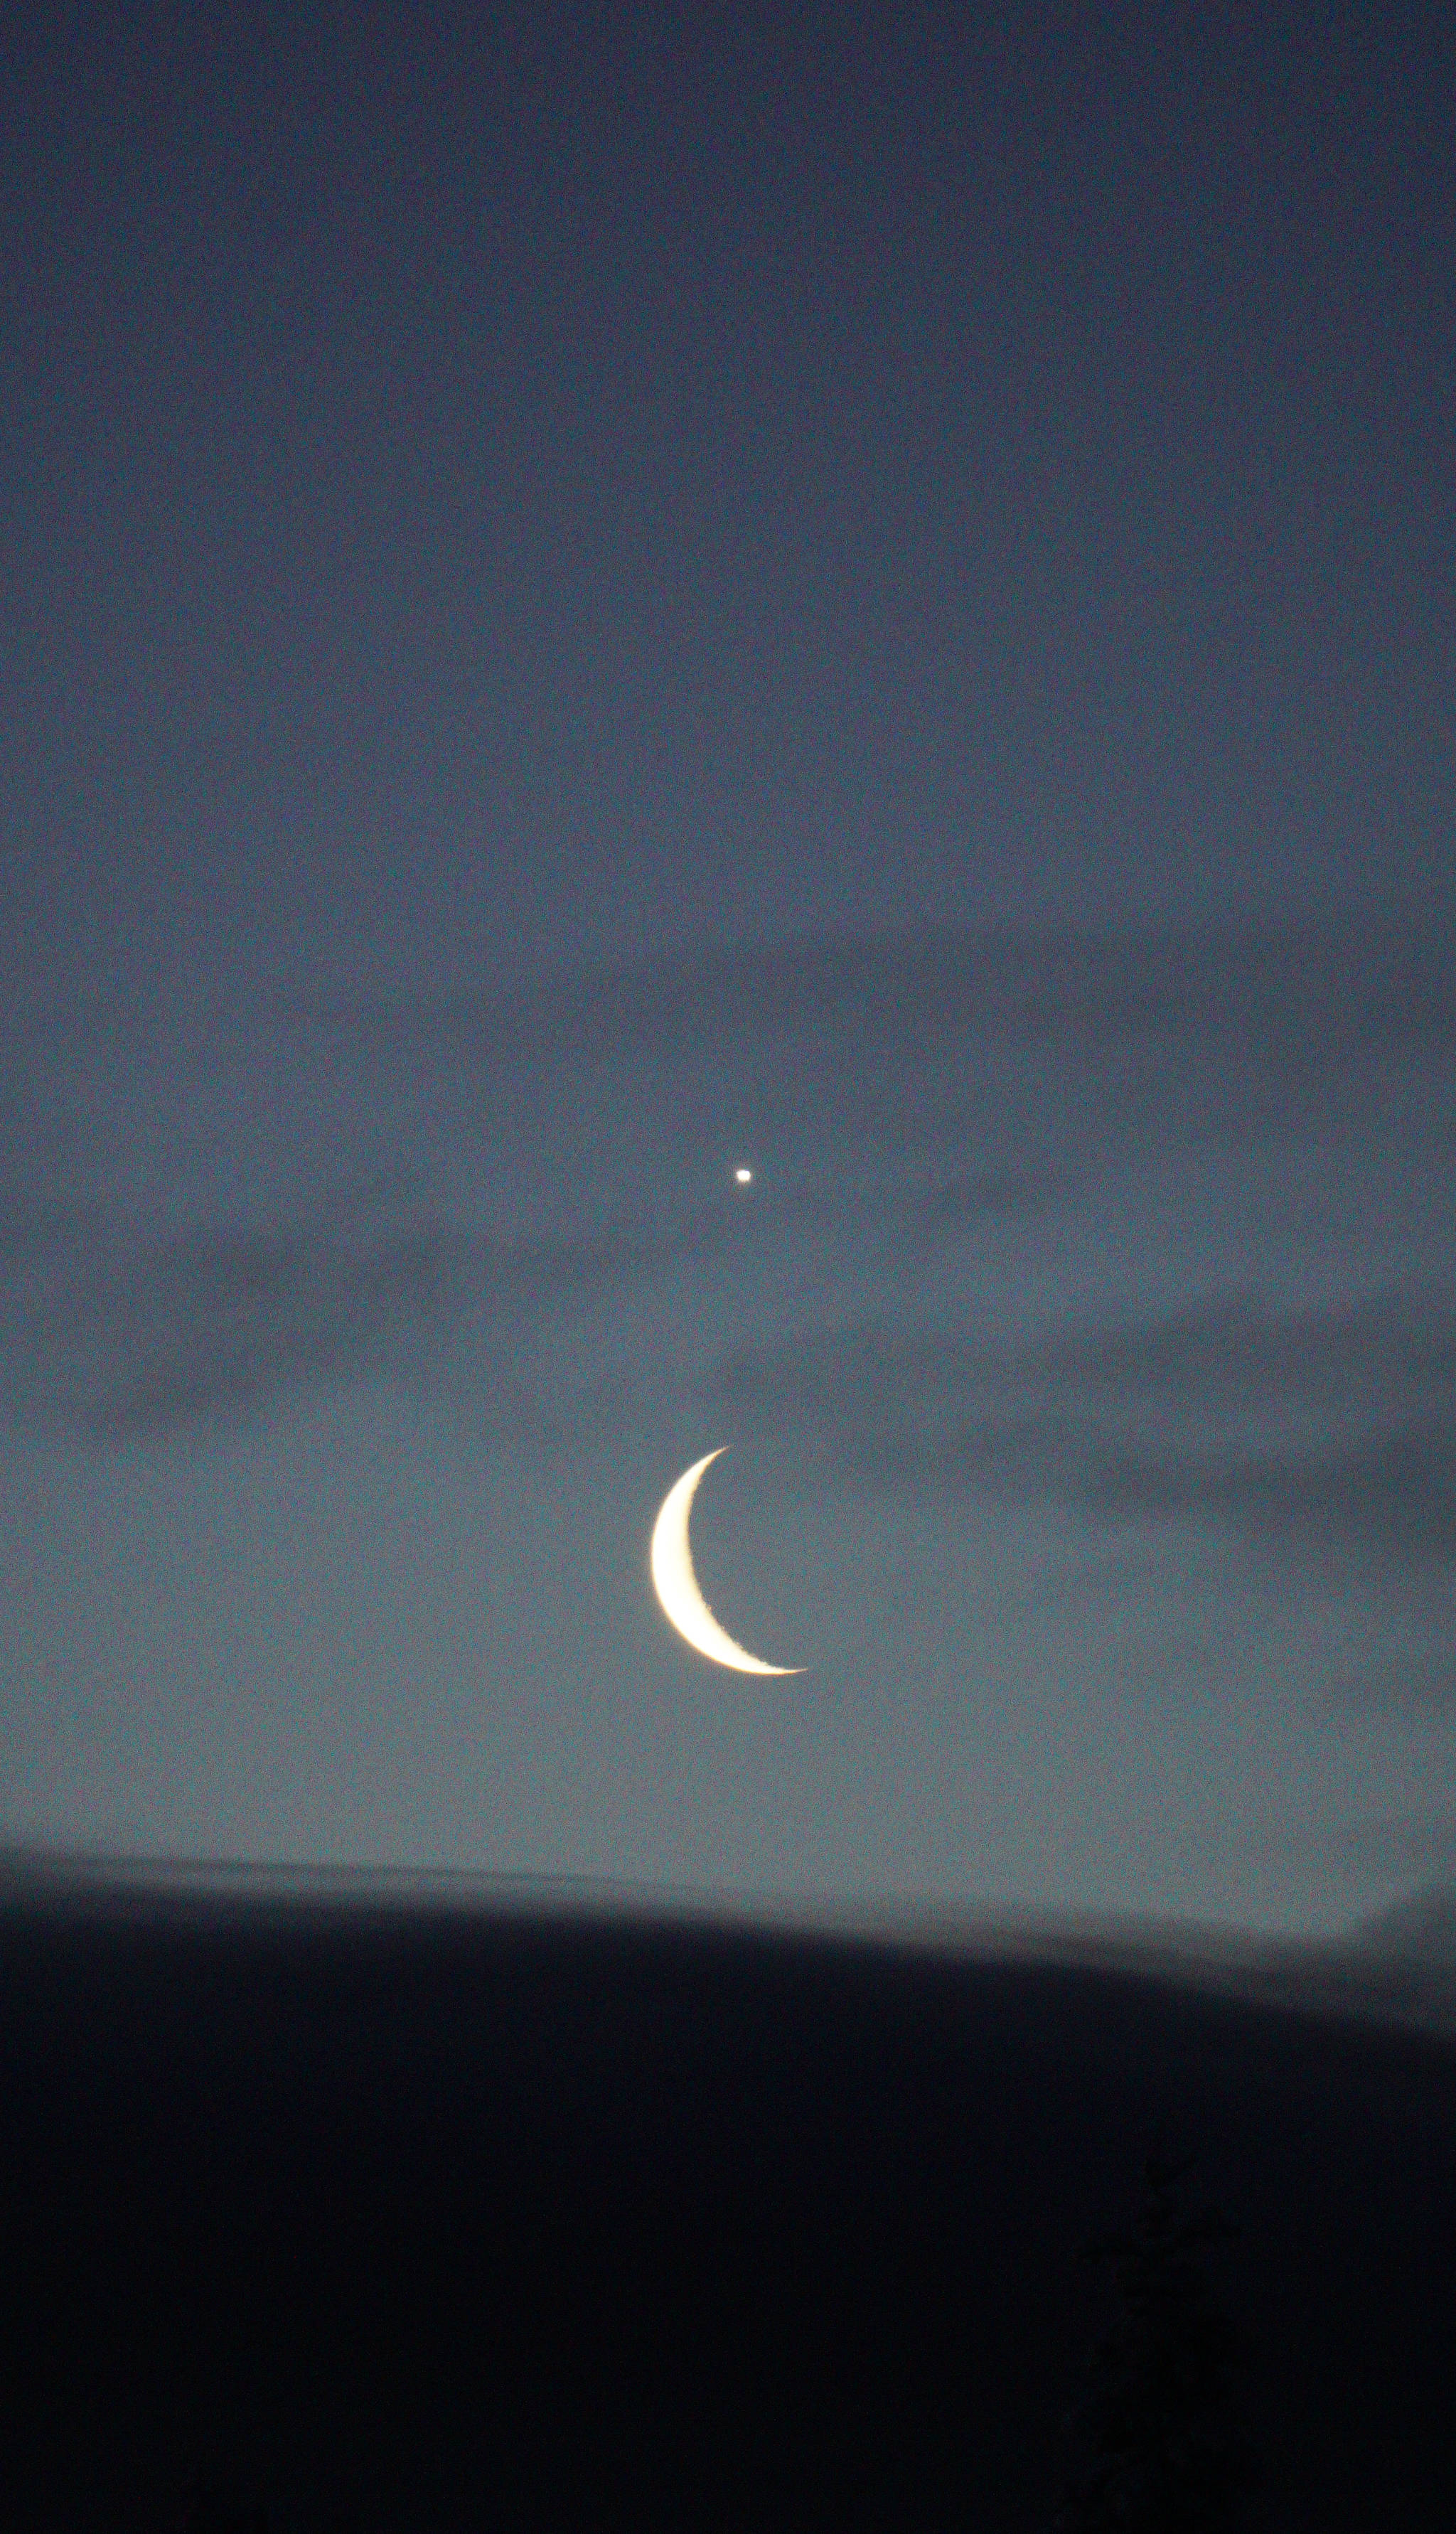 Venus shines over a crescent moon about 8:30 a.m. last Thursday, Jan. 31, 2019, in Homer, Alaska. (Photo by Michael Armstrong/Homer News)